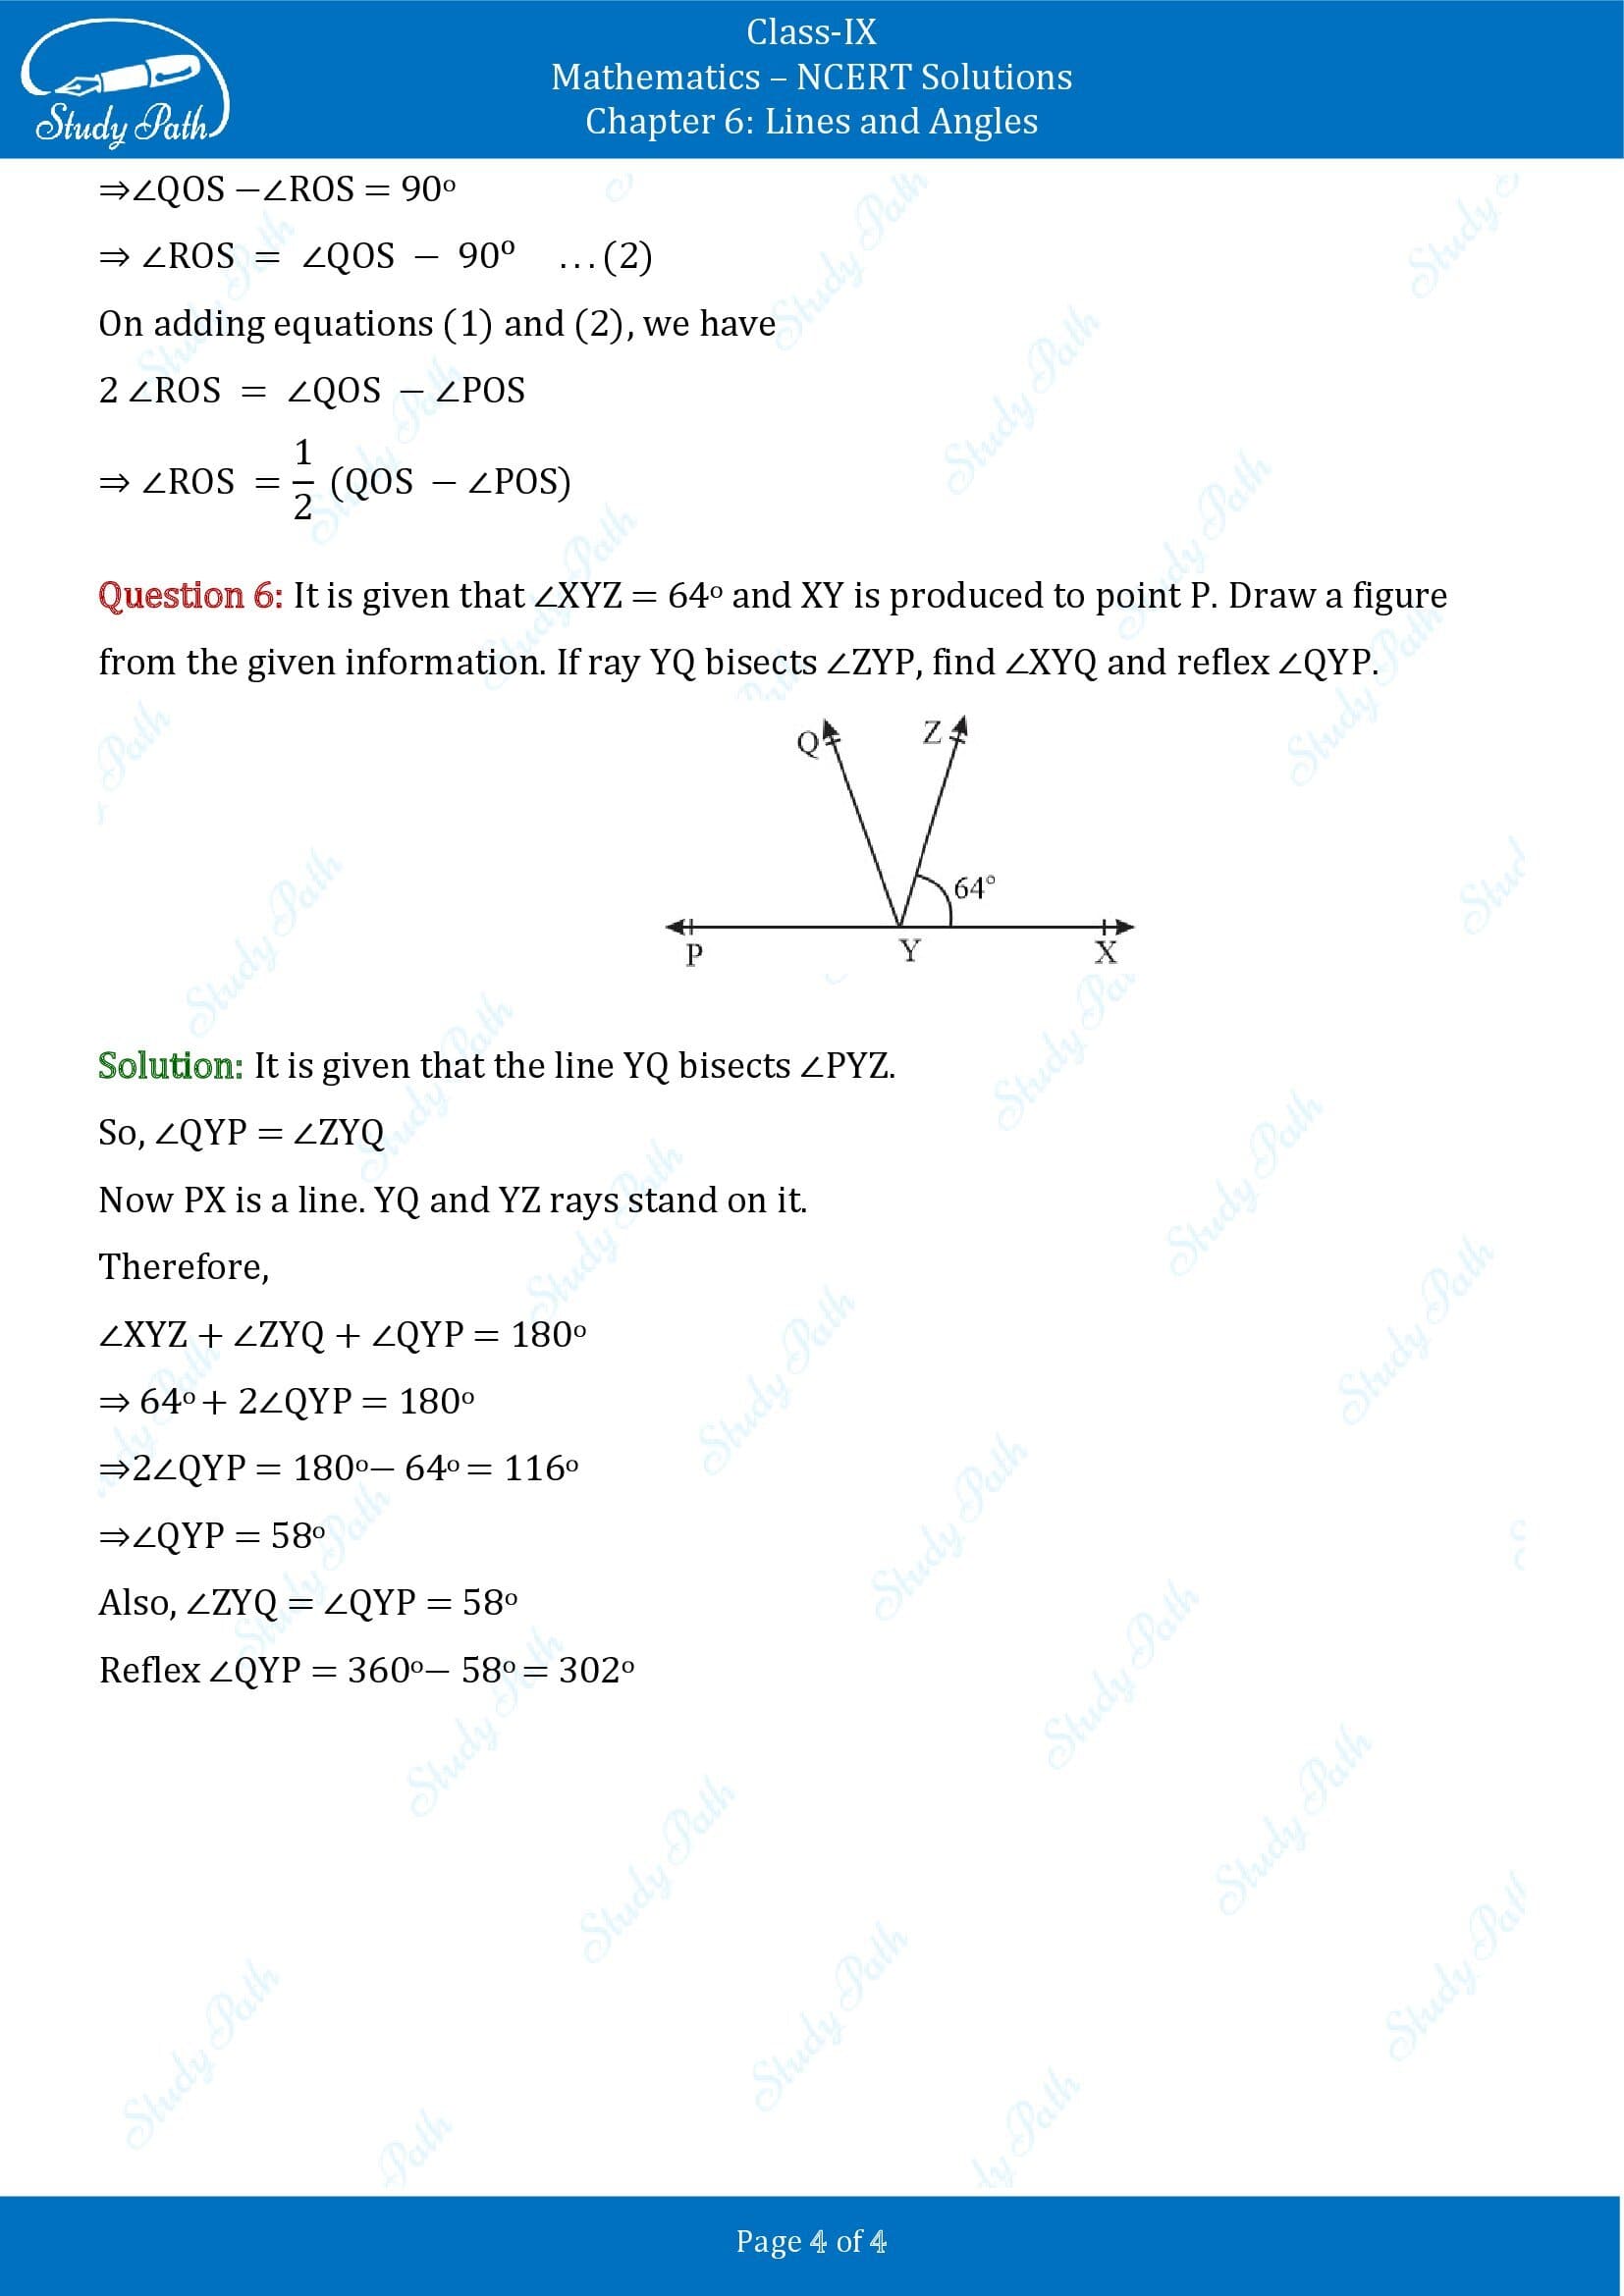 NCERT Solutions for Class 9 Maths Chapter 6 Lines and Angles Exercise 6.1 00004